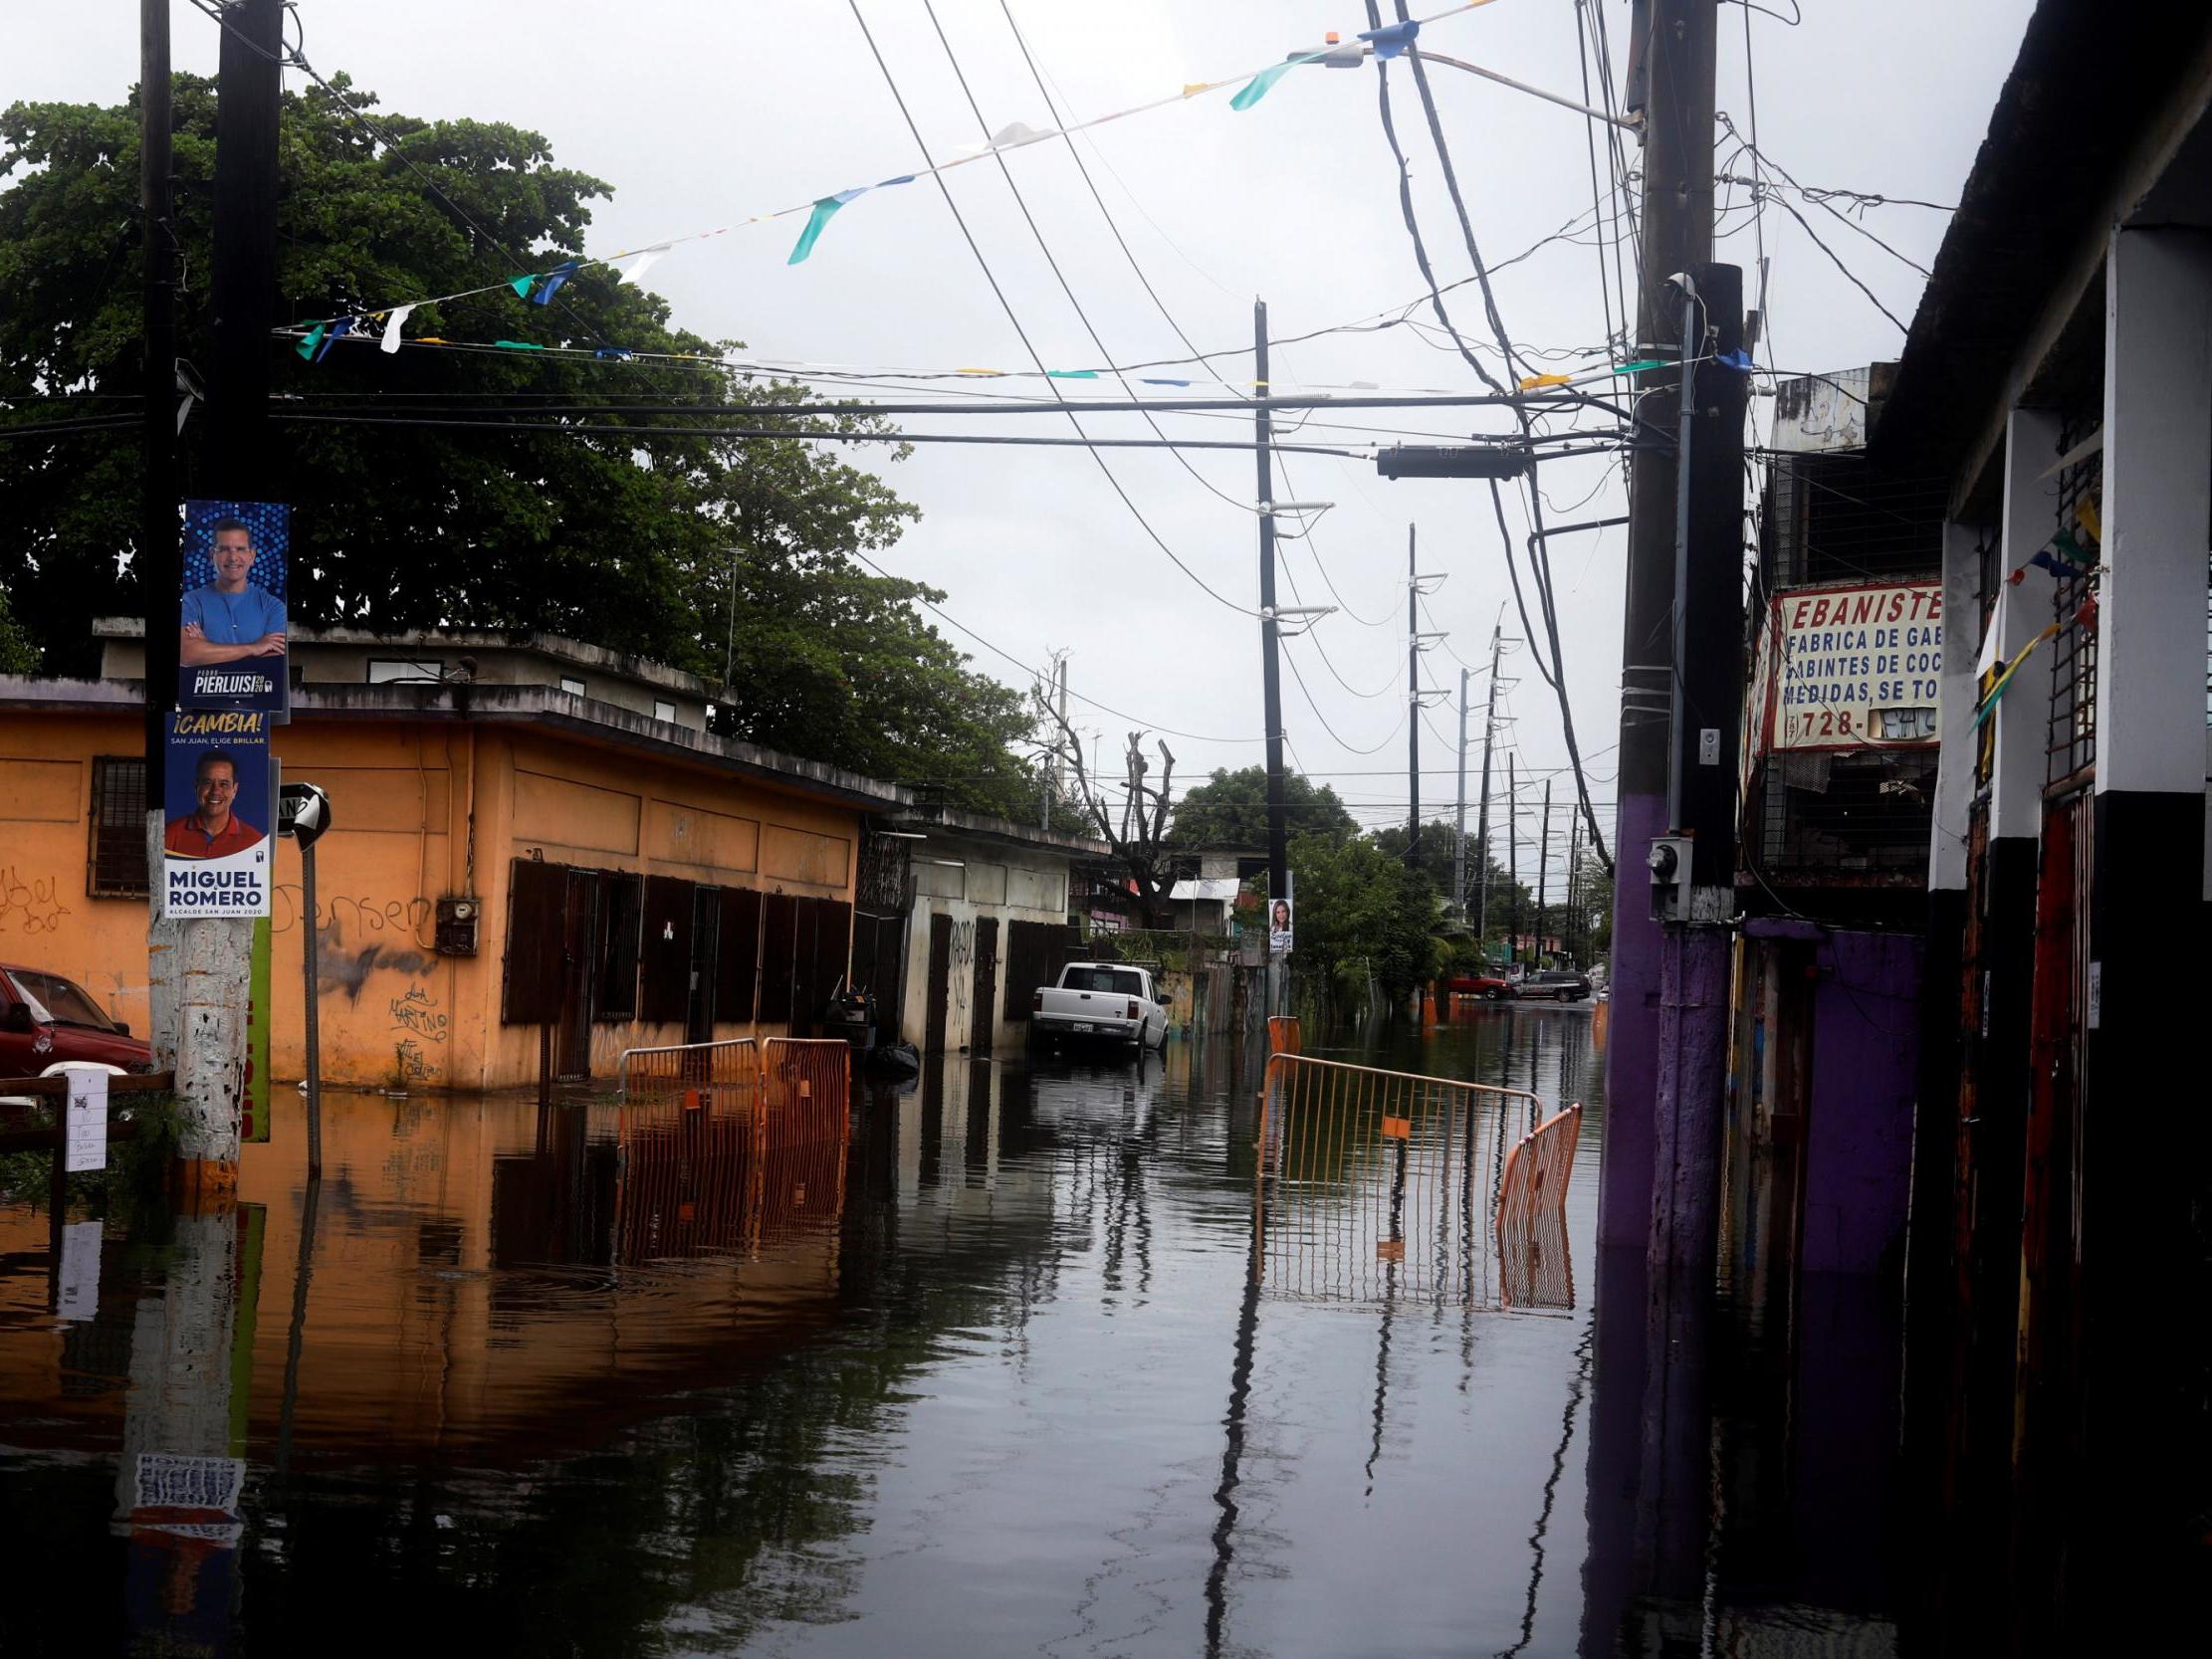 Streets were flooded during the passage of tropical storm Isaias, in San Juan, Puerto Rico